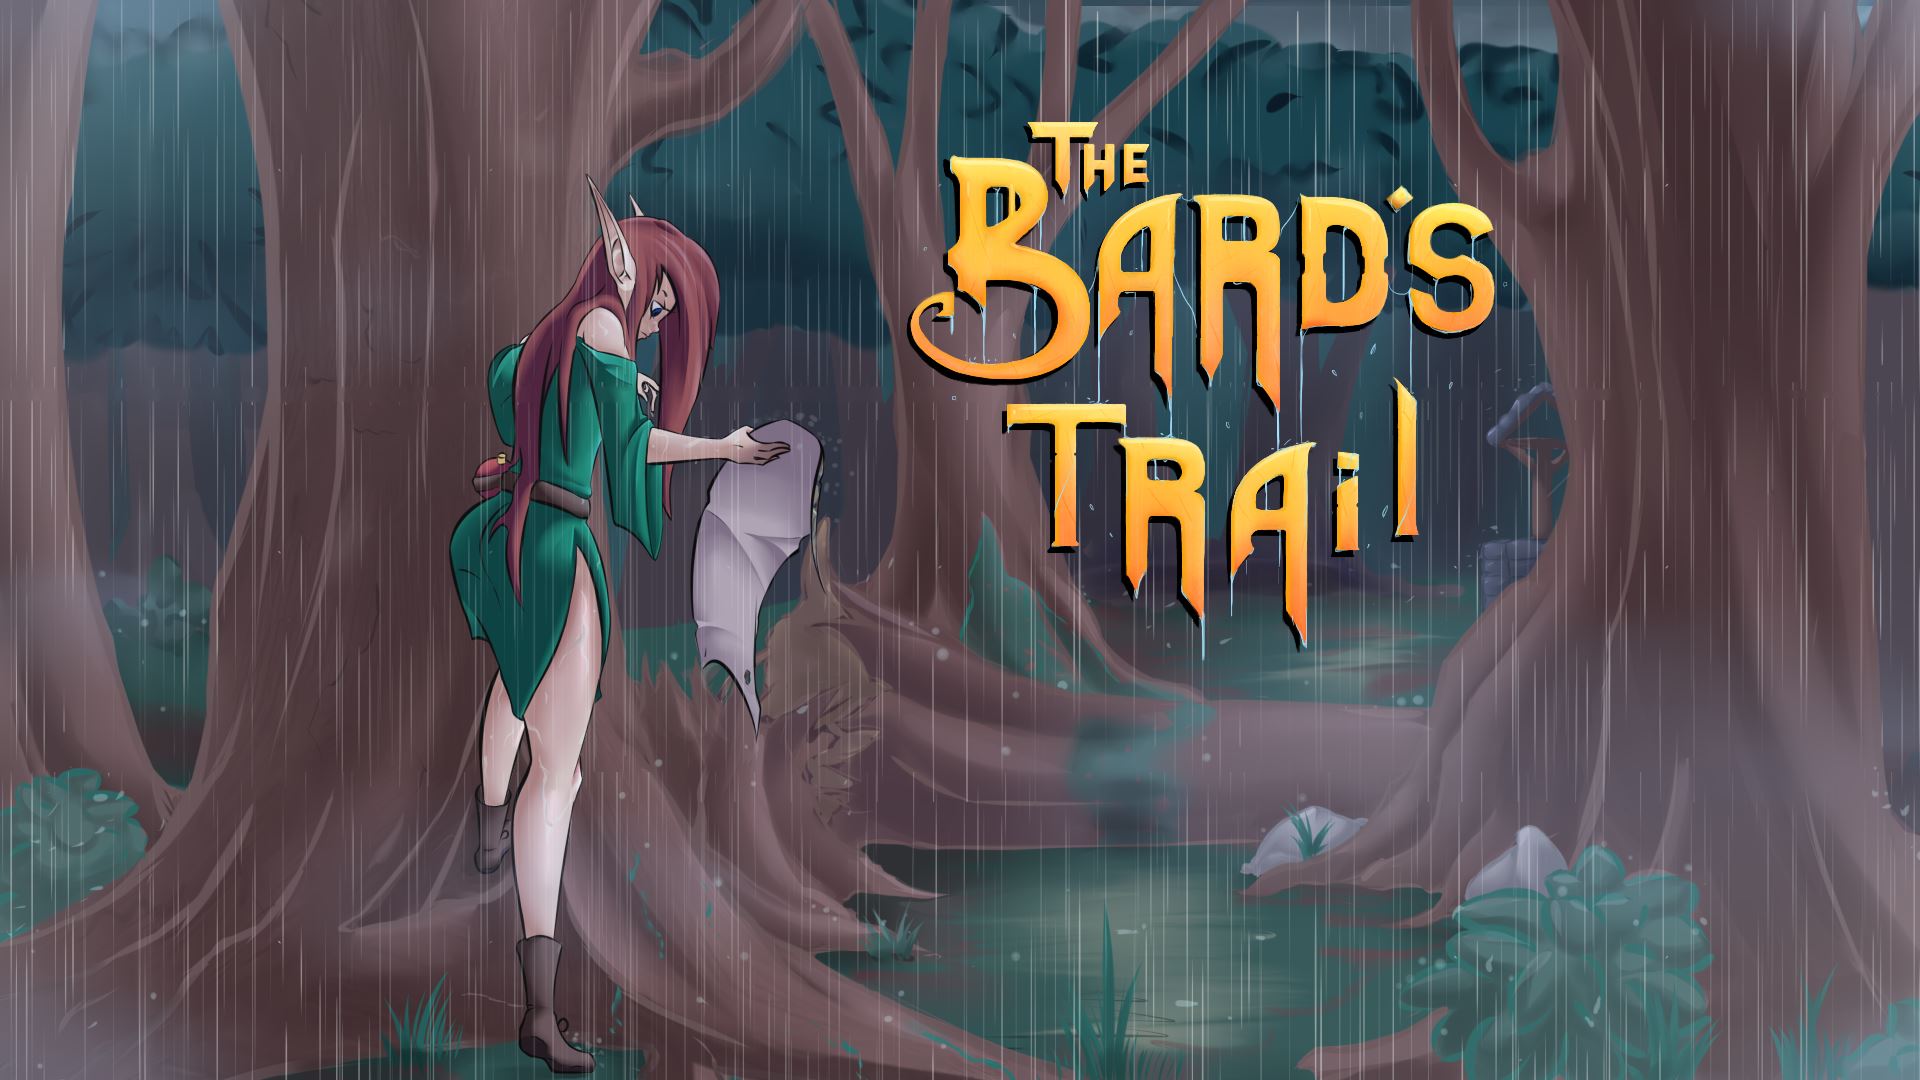 Bard’s Trail porn xxx game download cover